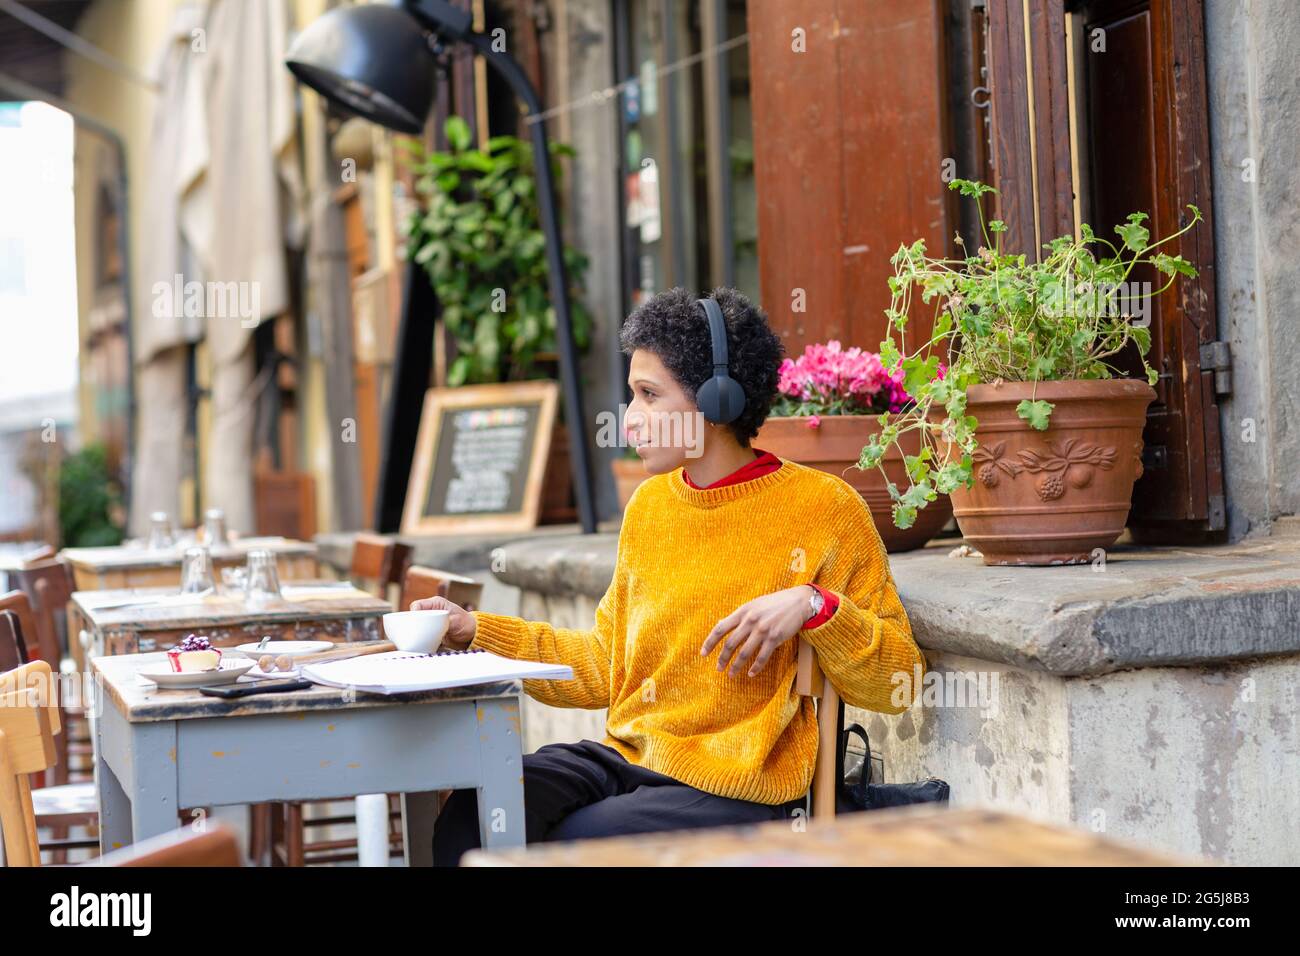 Italy, Tuscany, Pistoia, Woman with headphones sitting in outdoor cafe Stock Photo